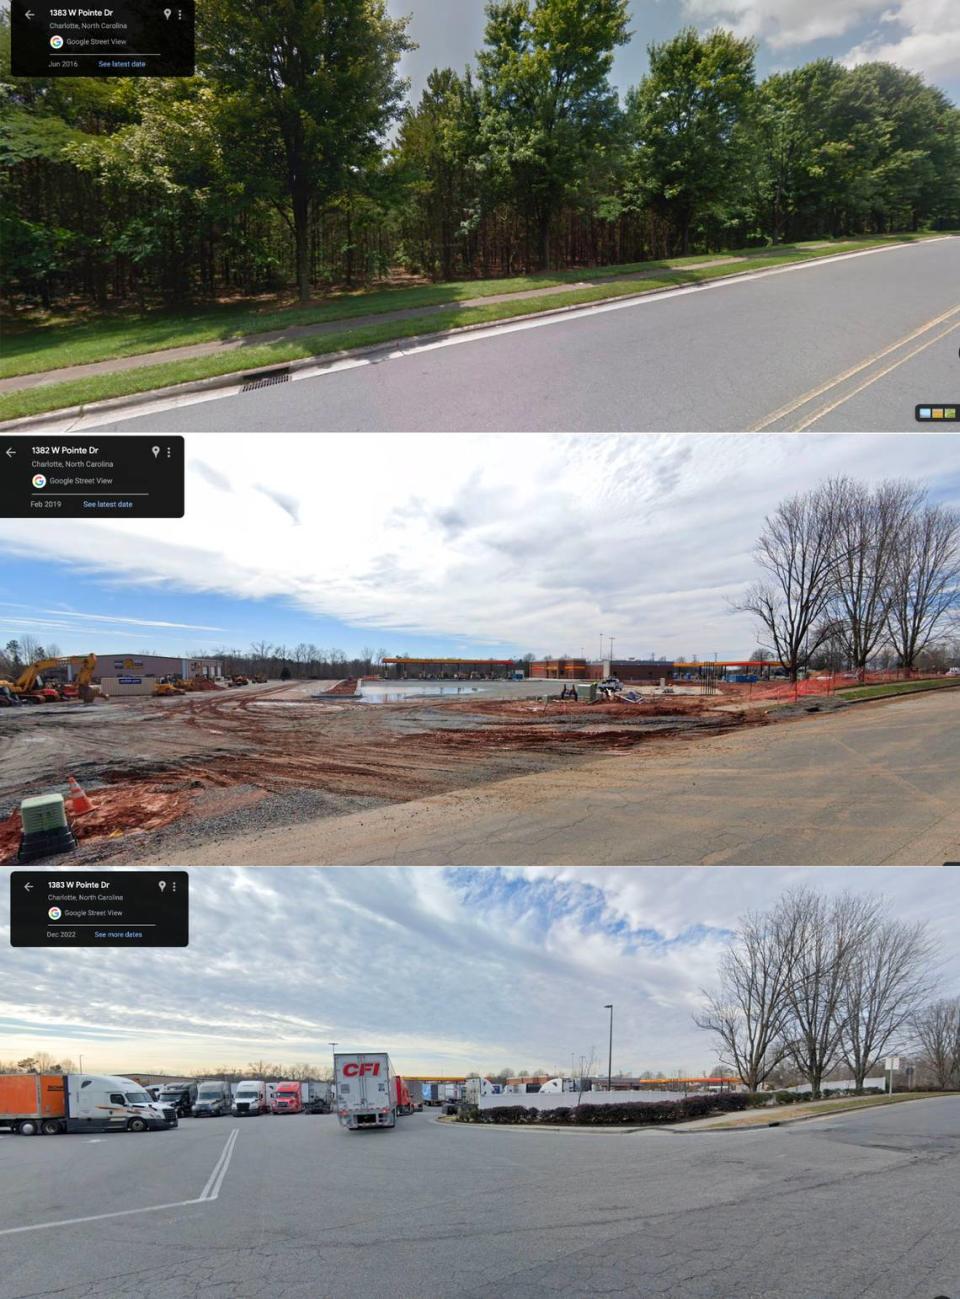 In 2017, developers building a Love’s Travel Stops & Country Store paid the city a fee of nearly $123,000 to avoid Charlotte’s onsite tree-saving rules. The shop is located on West Pointe Drive in east Charlotte, north of Interstate 85. Here are photos from 2016, when the lot was wooded; from 2019, when the site was under construction; and from 2022, after construction was finished. Google Map photos.